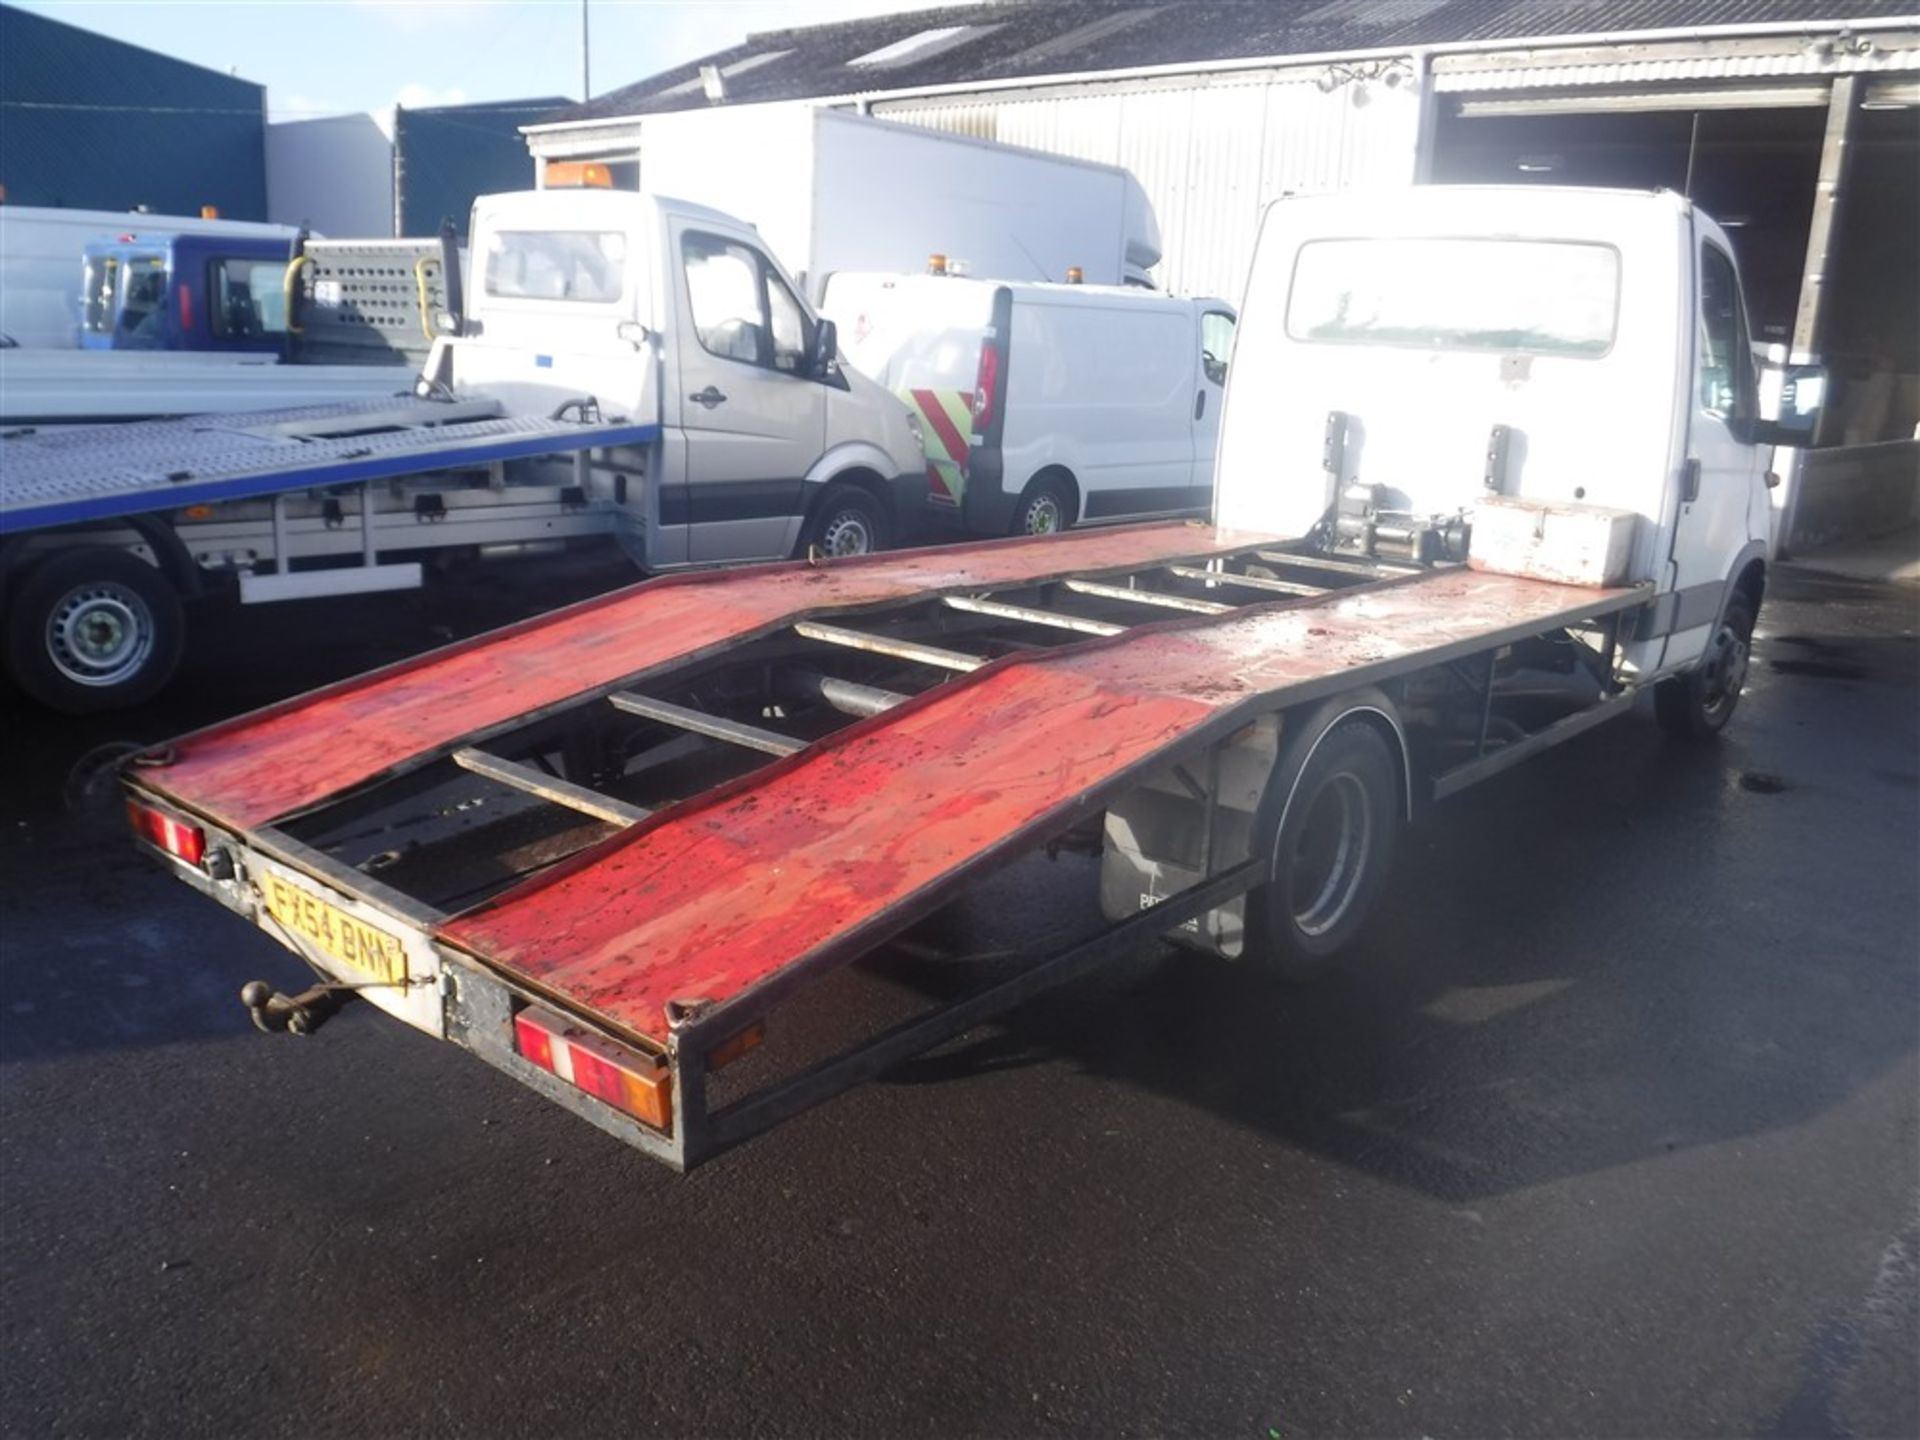 54 reg IVECO 45C15 RECOVERY TRUCK, 1ST REG 10/04, 512965KM, V5 HERE, 2 FORMER KEEPERS [NO VAT] - Image 4 of 5